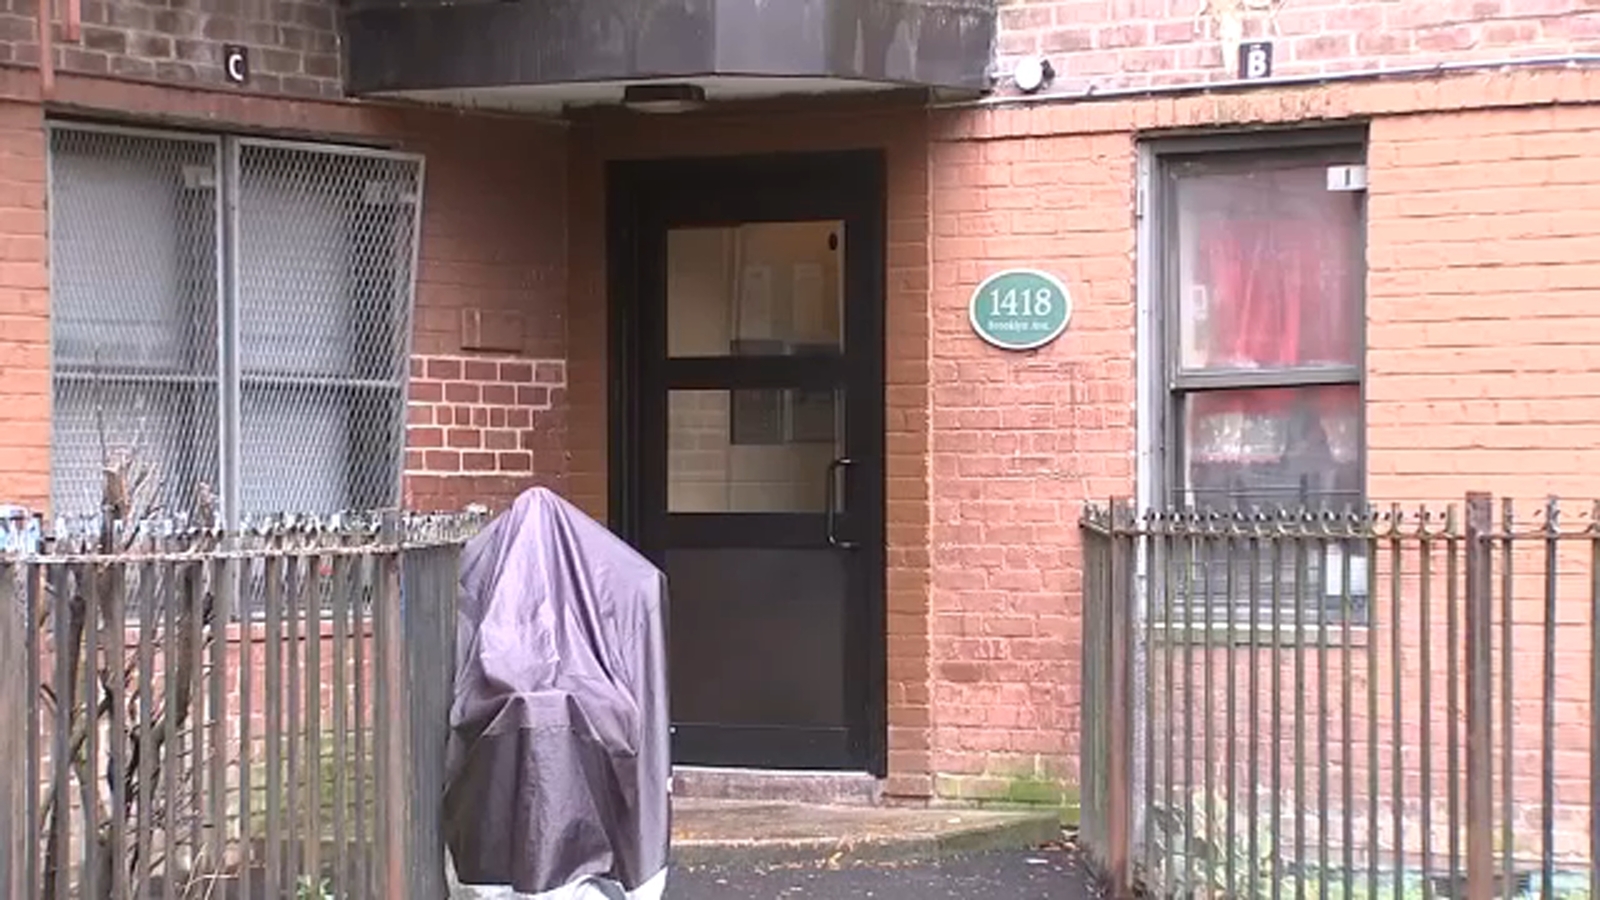 Family demands swift justice after father, son killed in Brooklyn apartment